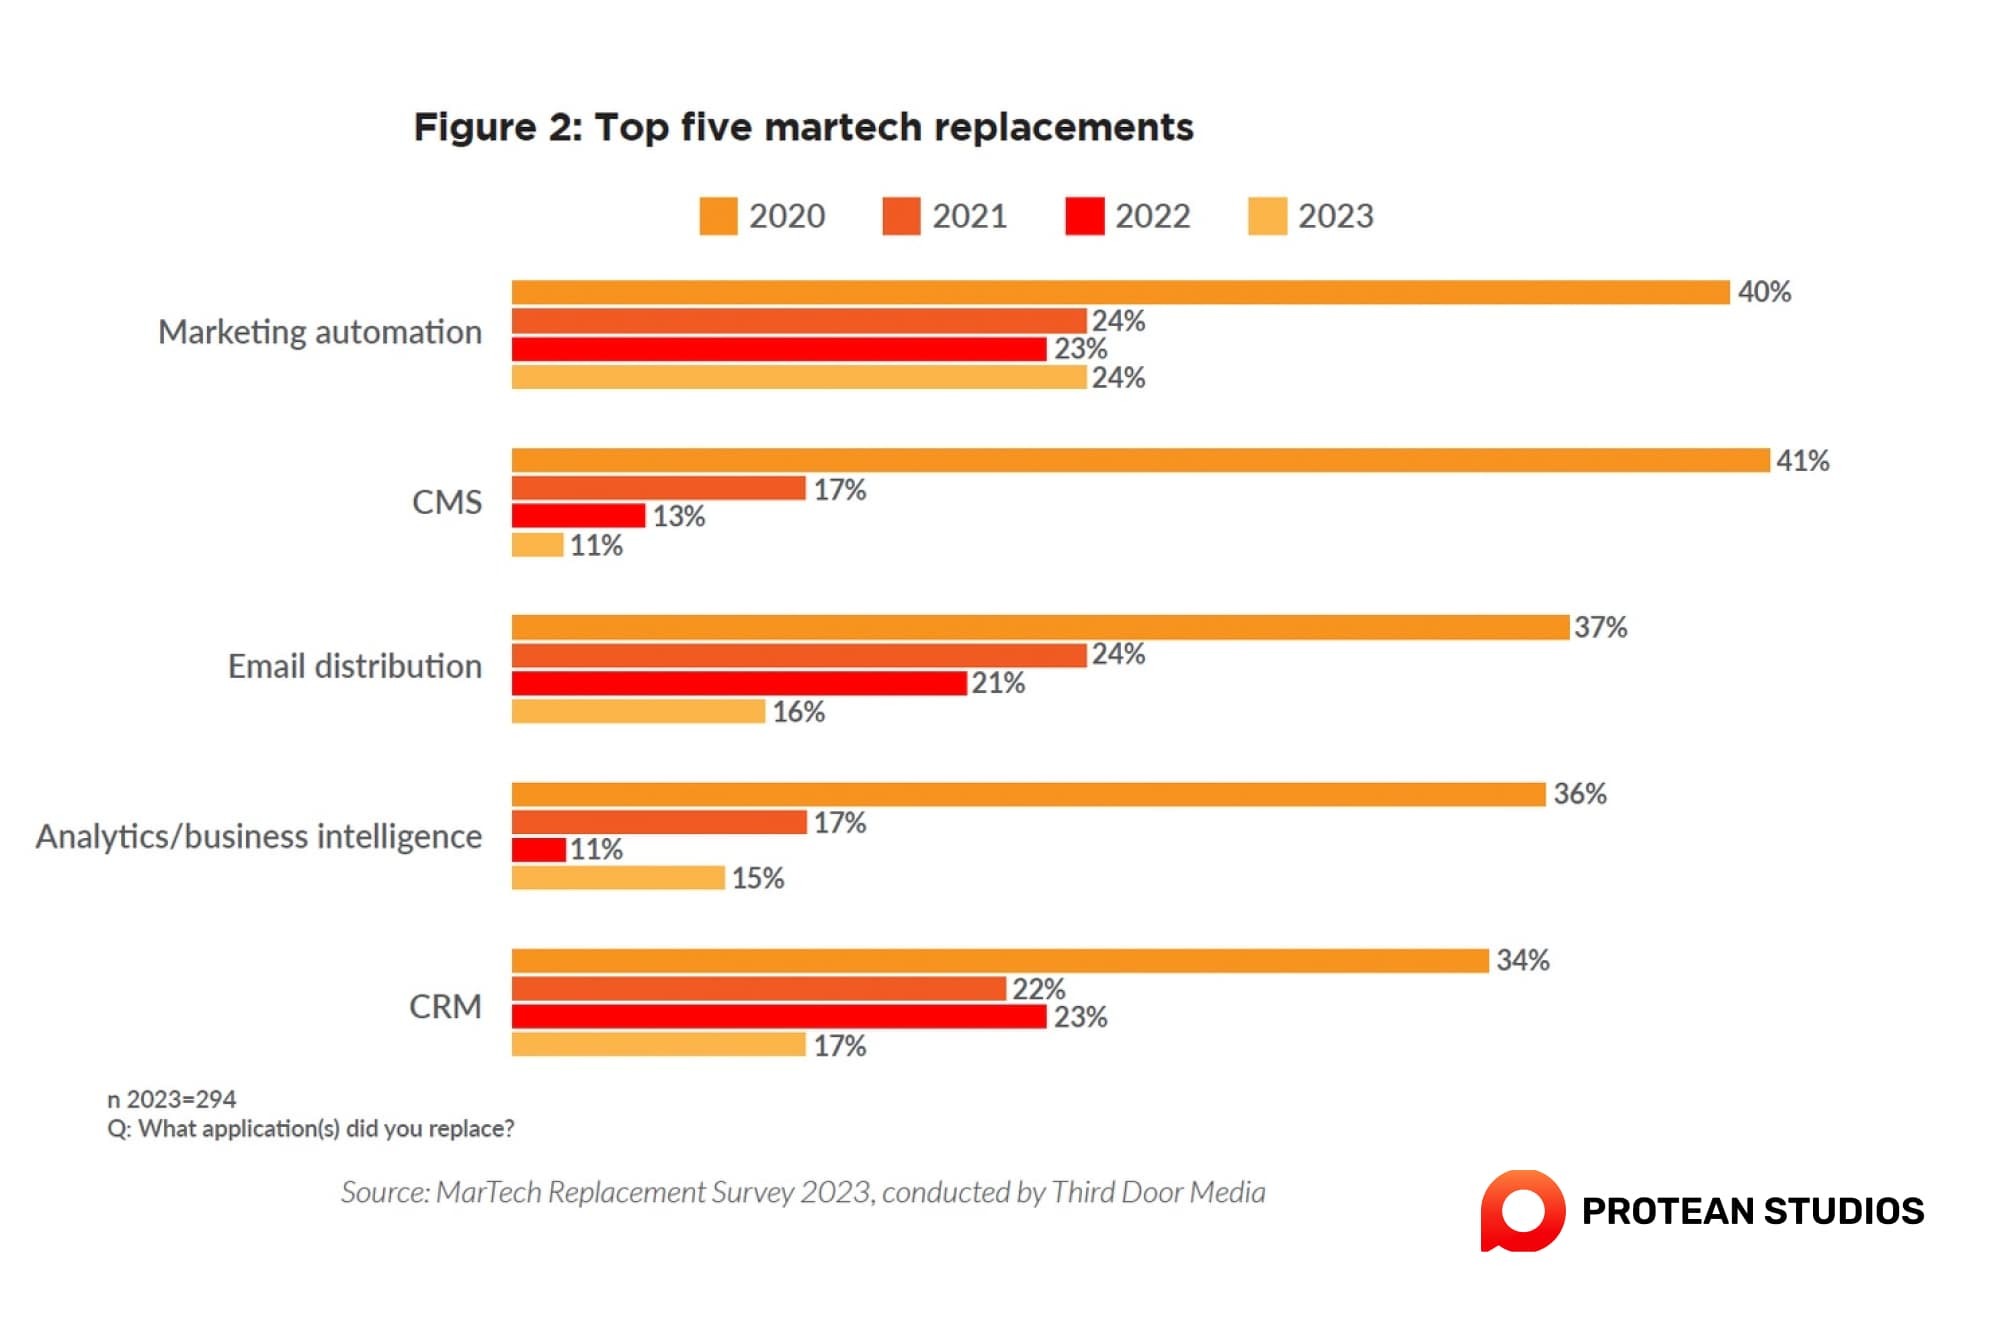 Top 5 aspects dominate the MarTech market